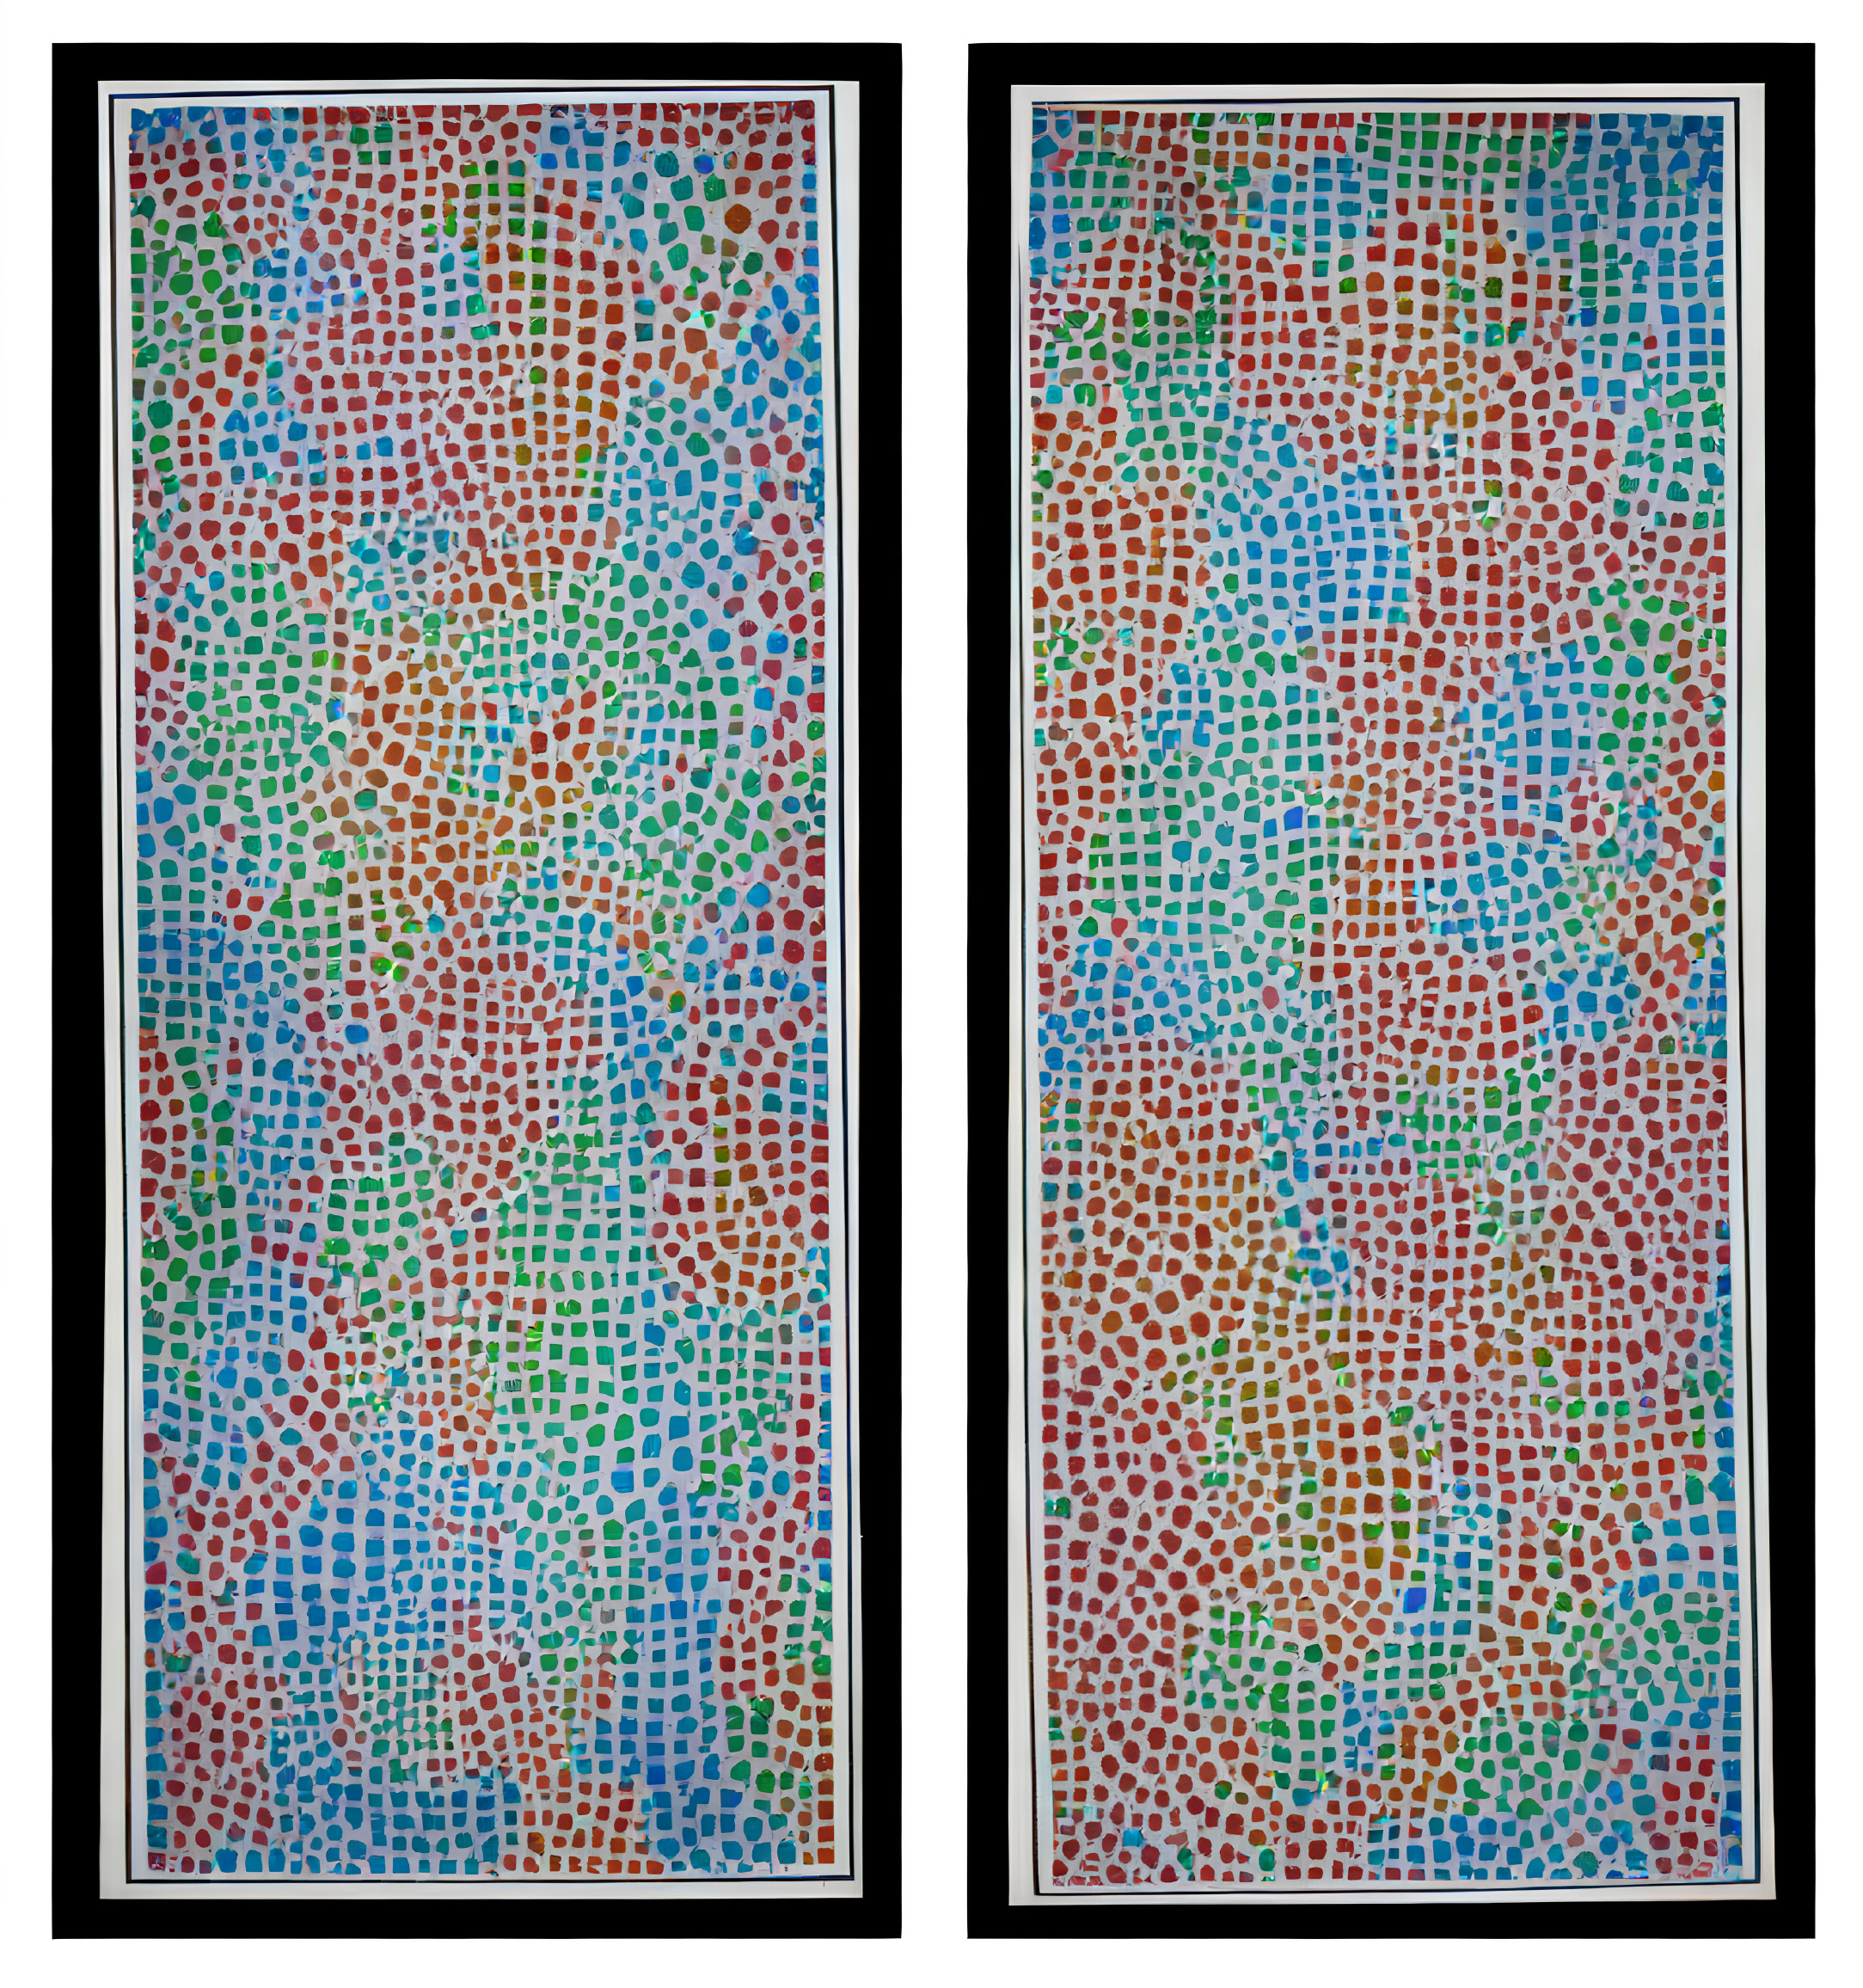 Abstract Dot Pattern Prints in Blue, Green, and Red on White Background